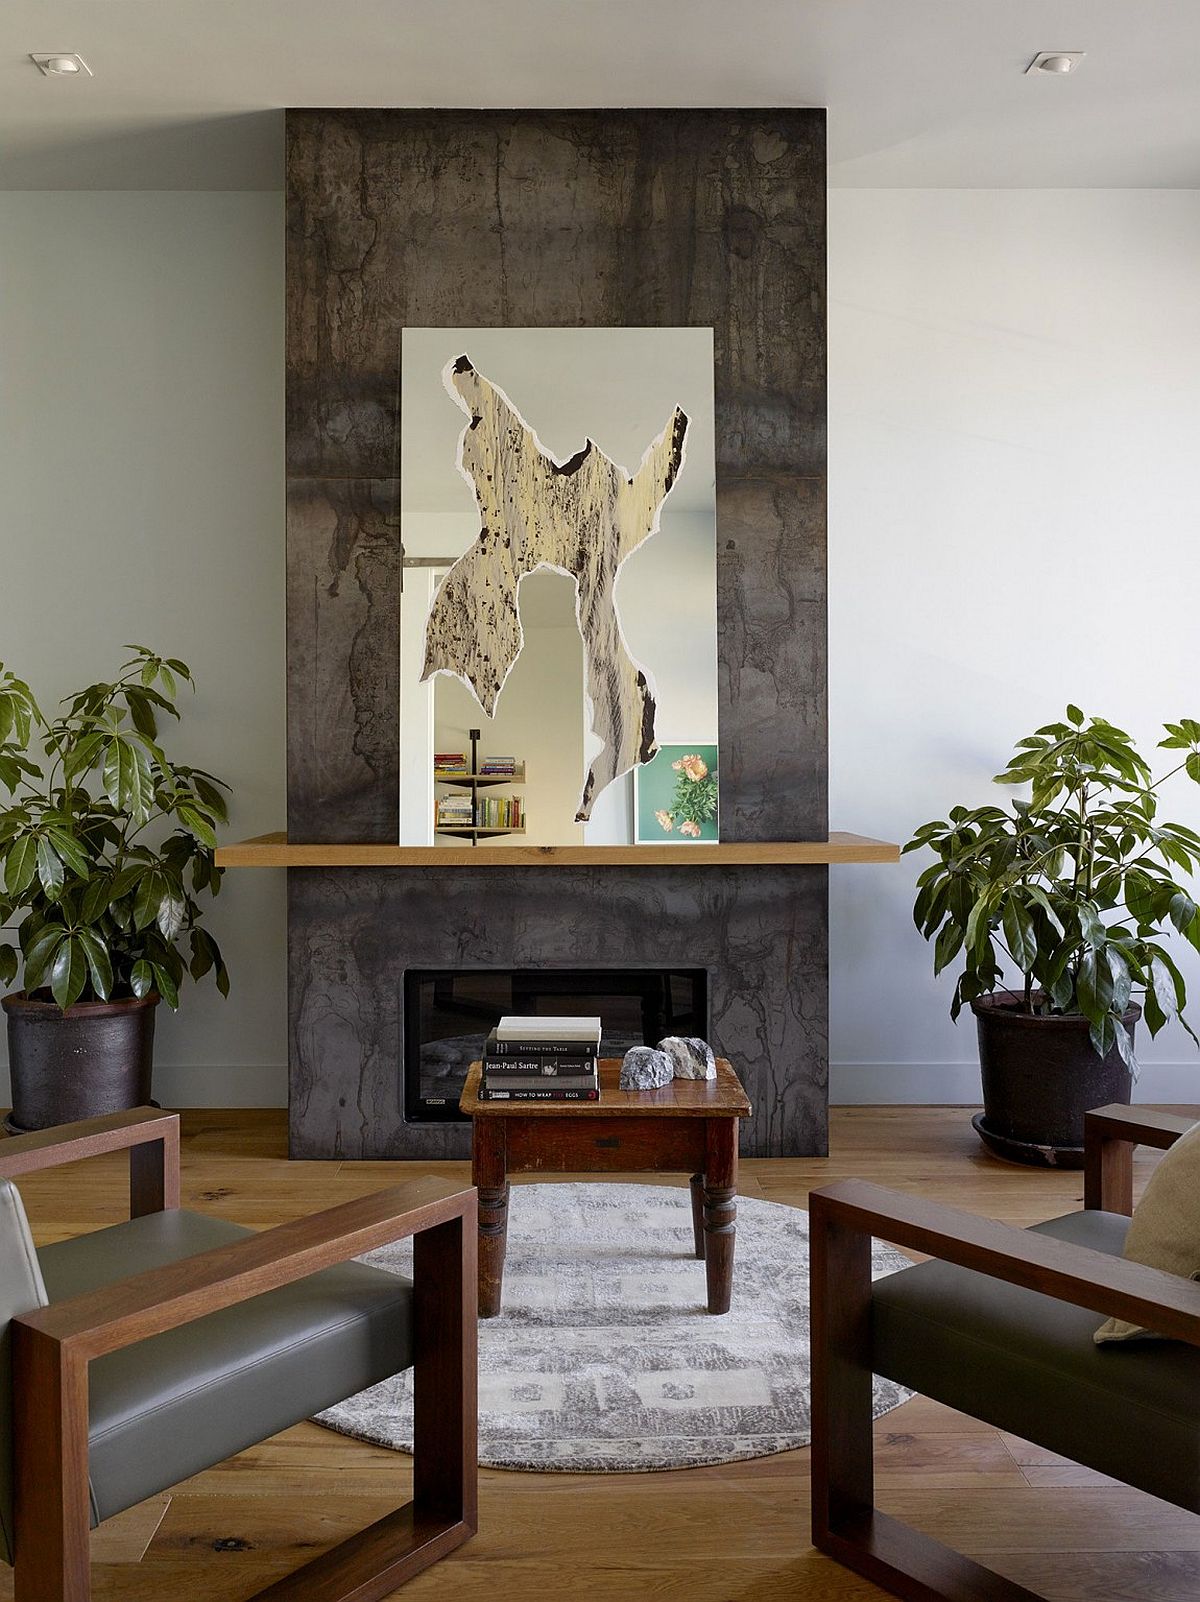 Creative decor and mirror transform the space surrounding the fireplace